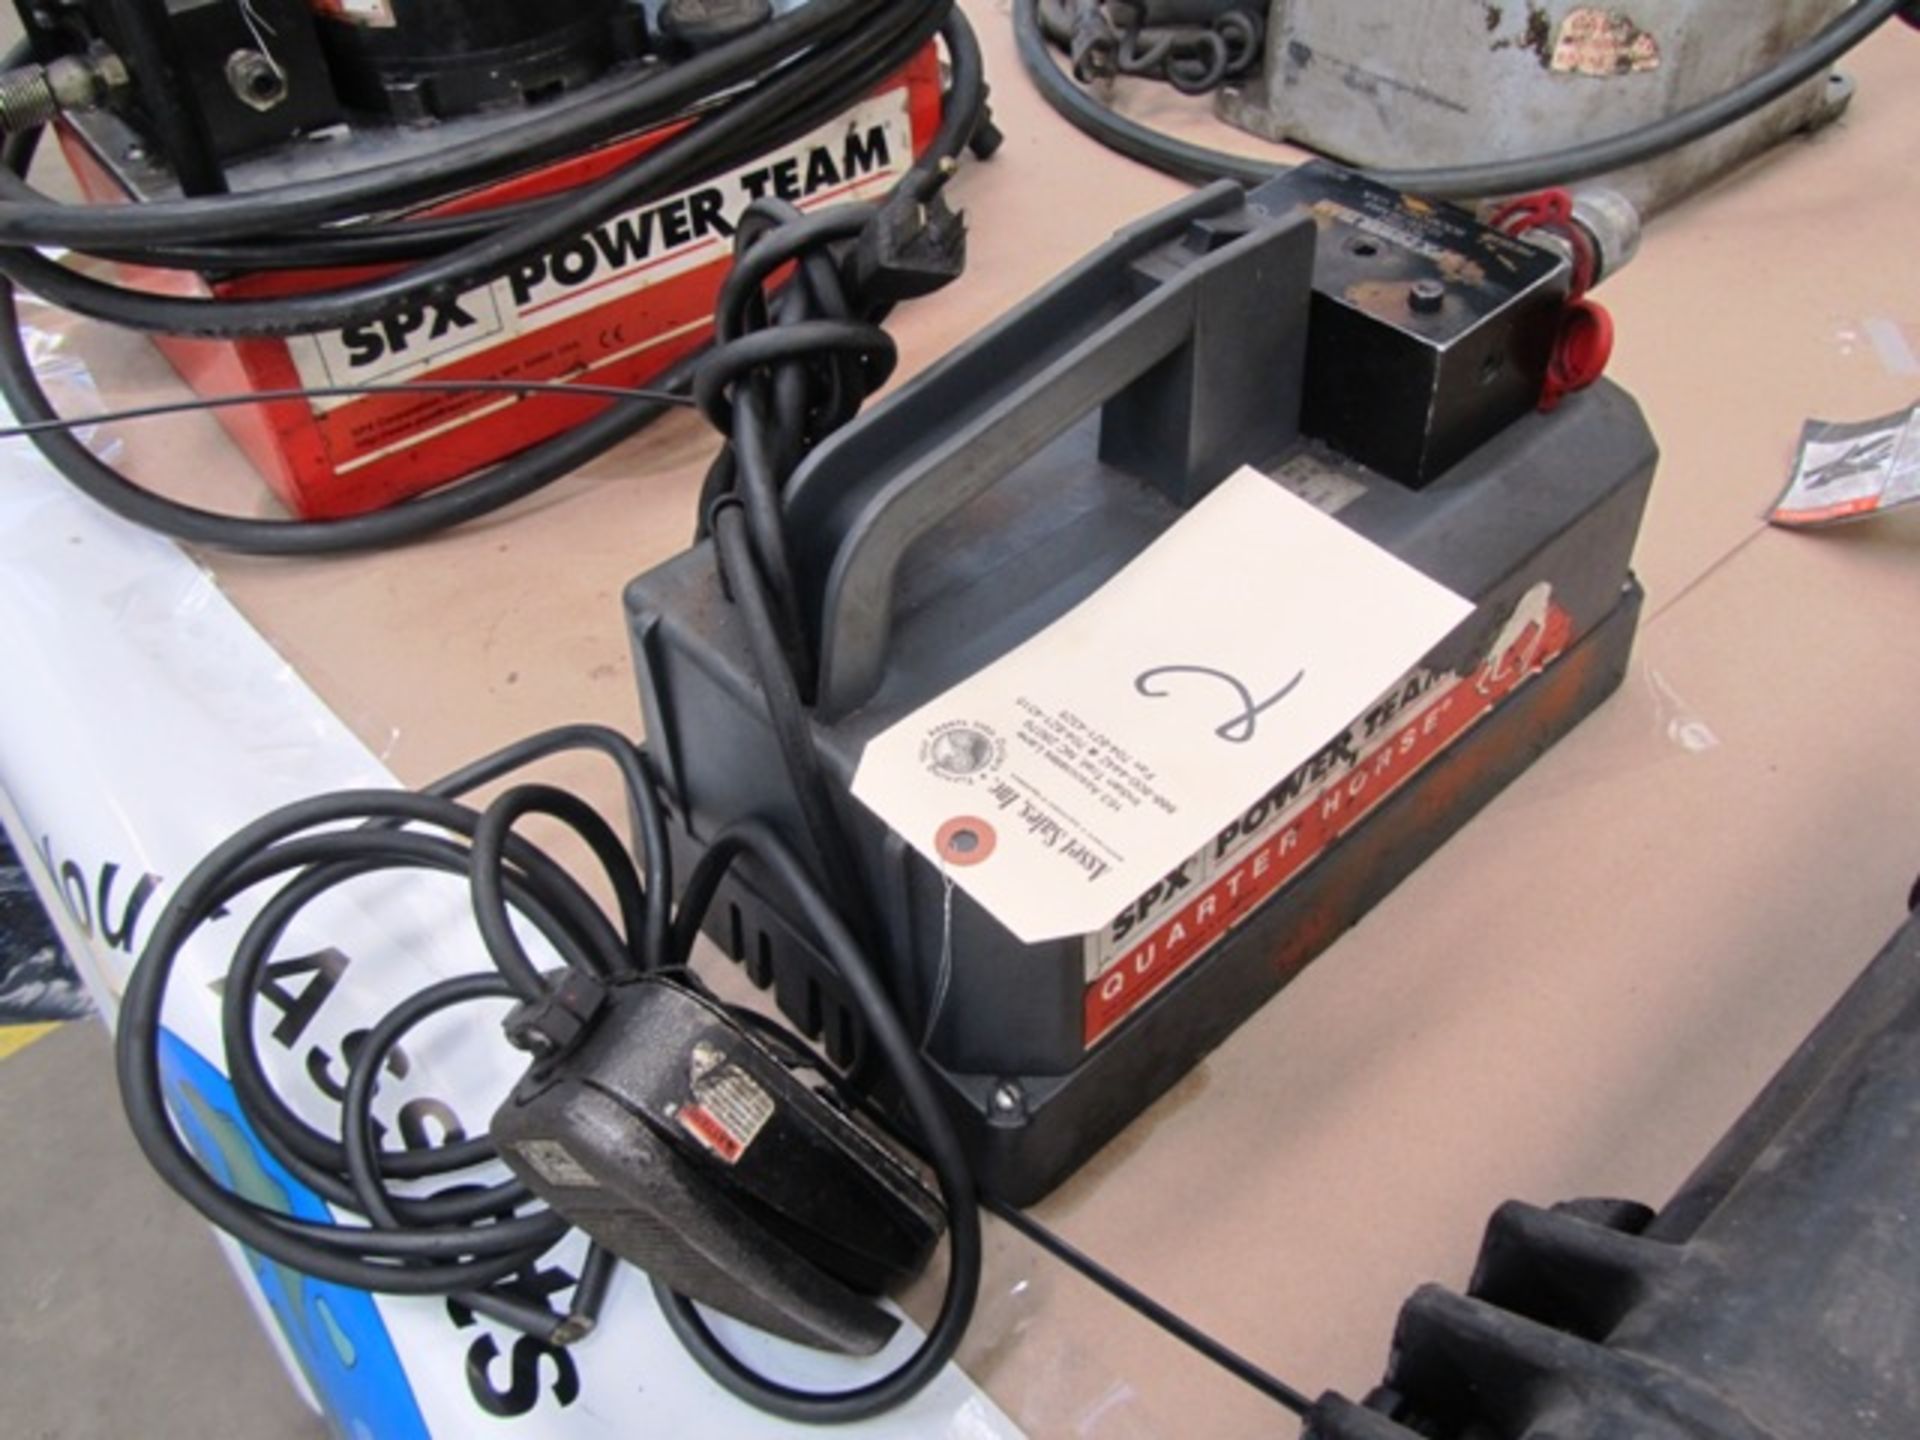 SPX Power Team Quarter Horse Hydraulic Unit with Foot Pedal